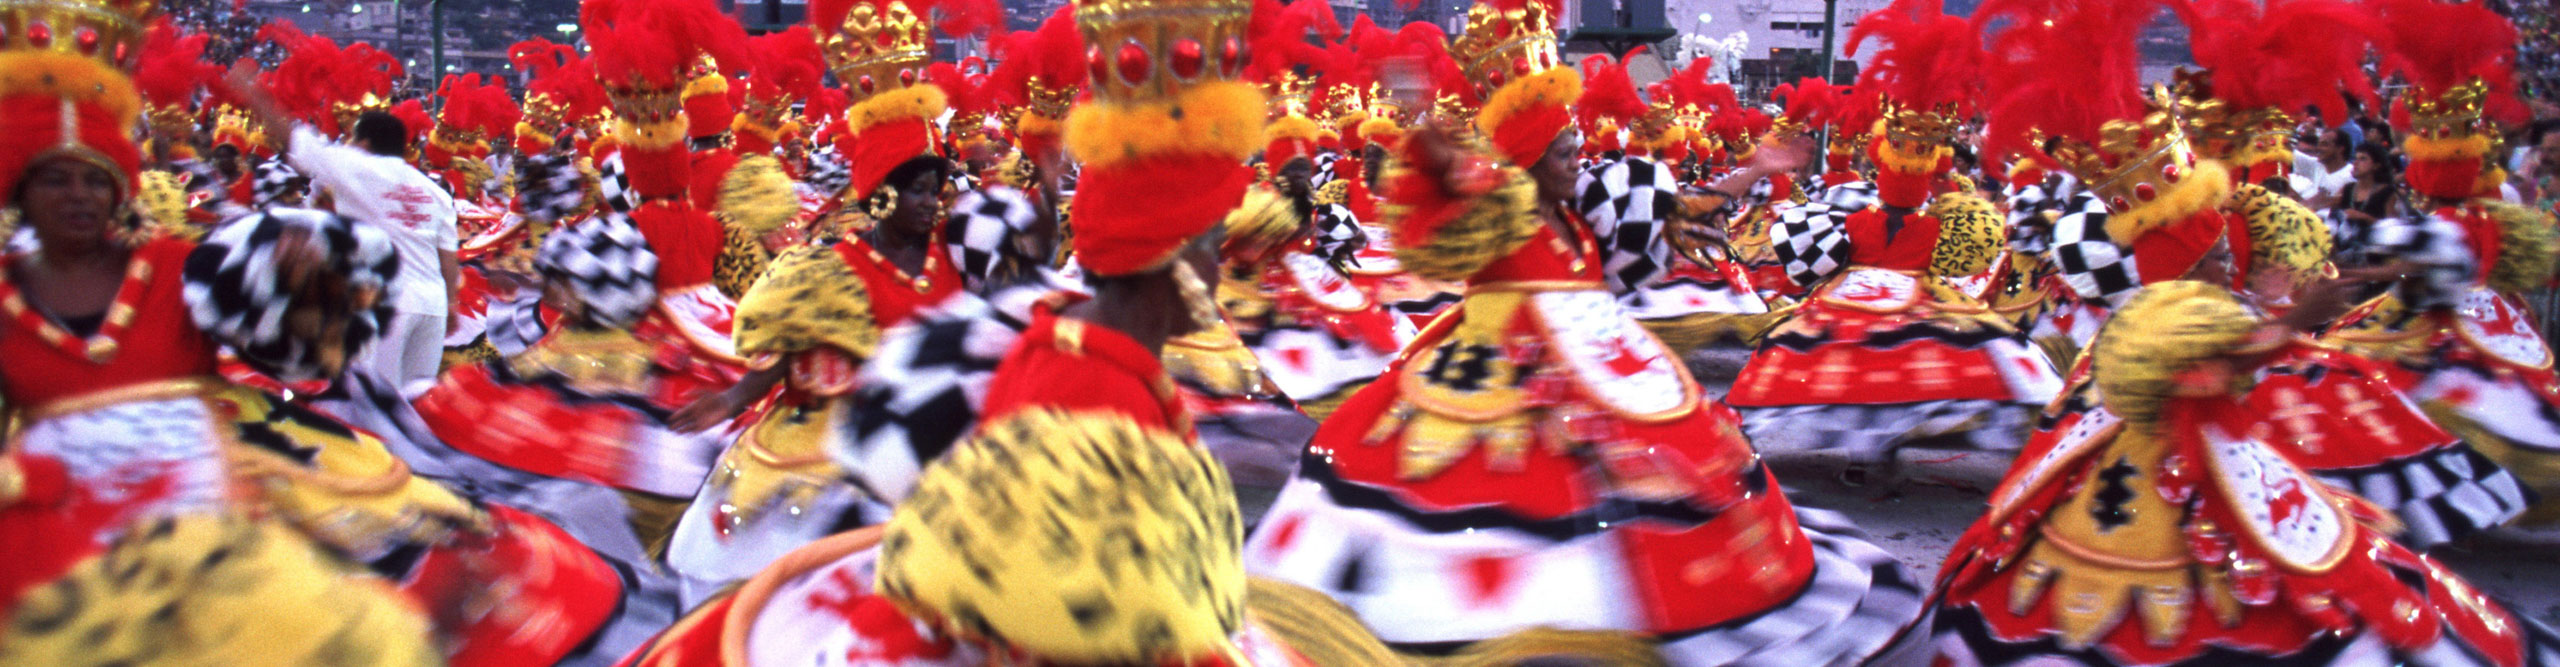 Woman dancing in colourful red and yellow costumes, with headdresses at the Rio carnival in Brazil 